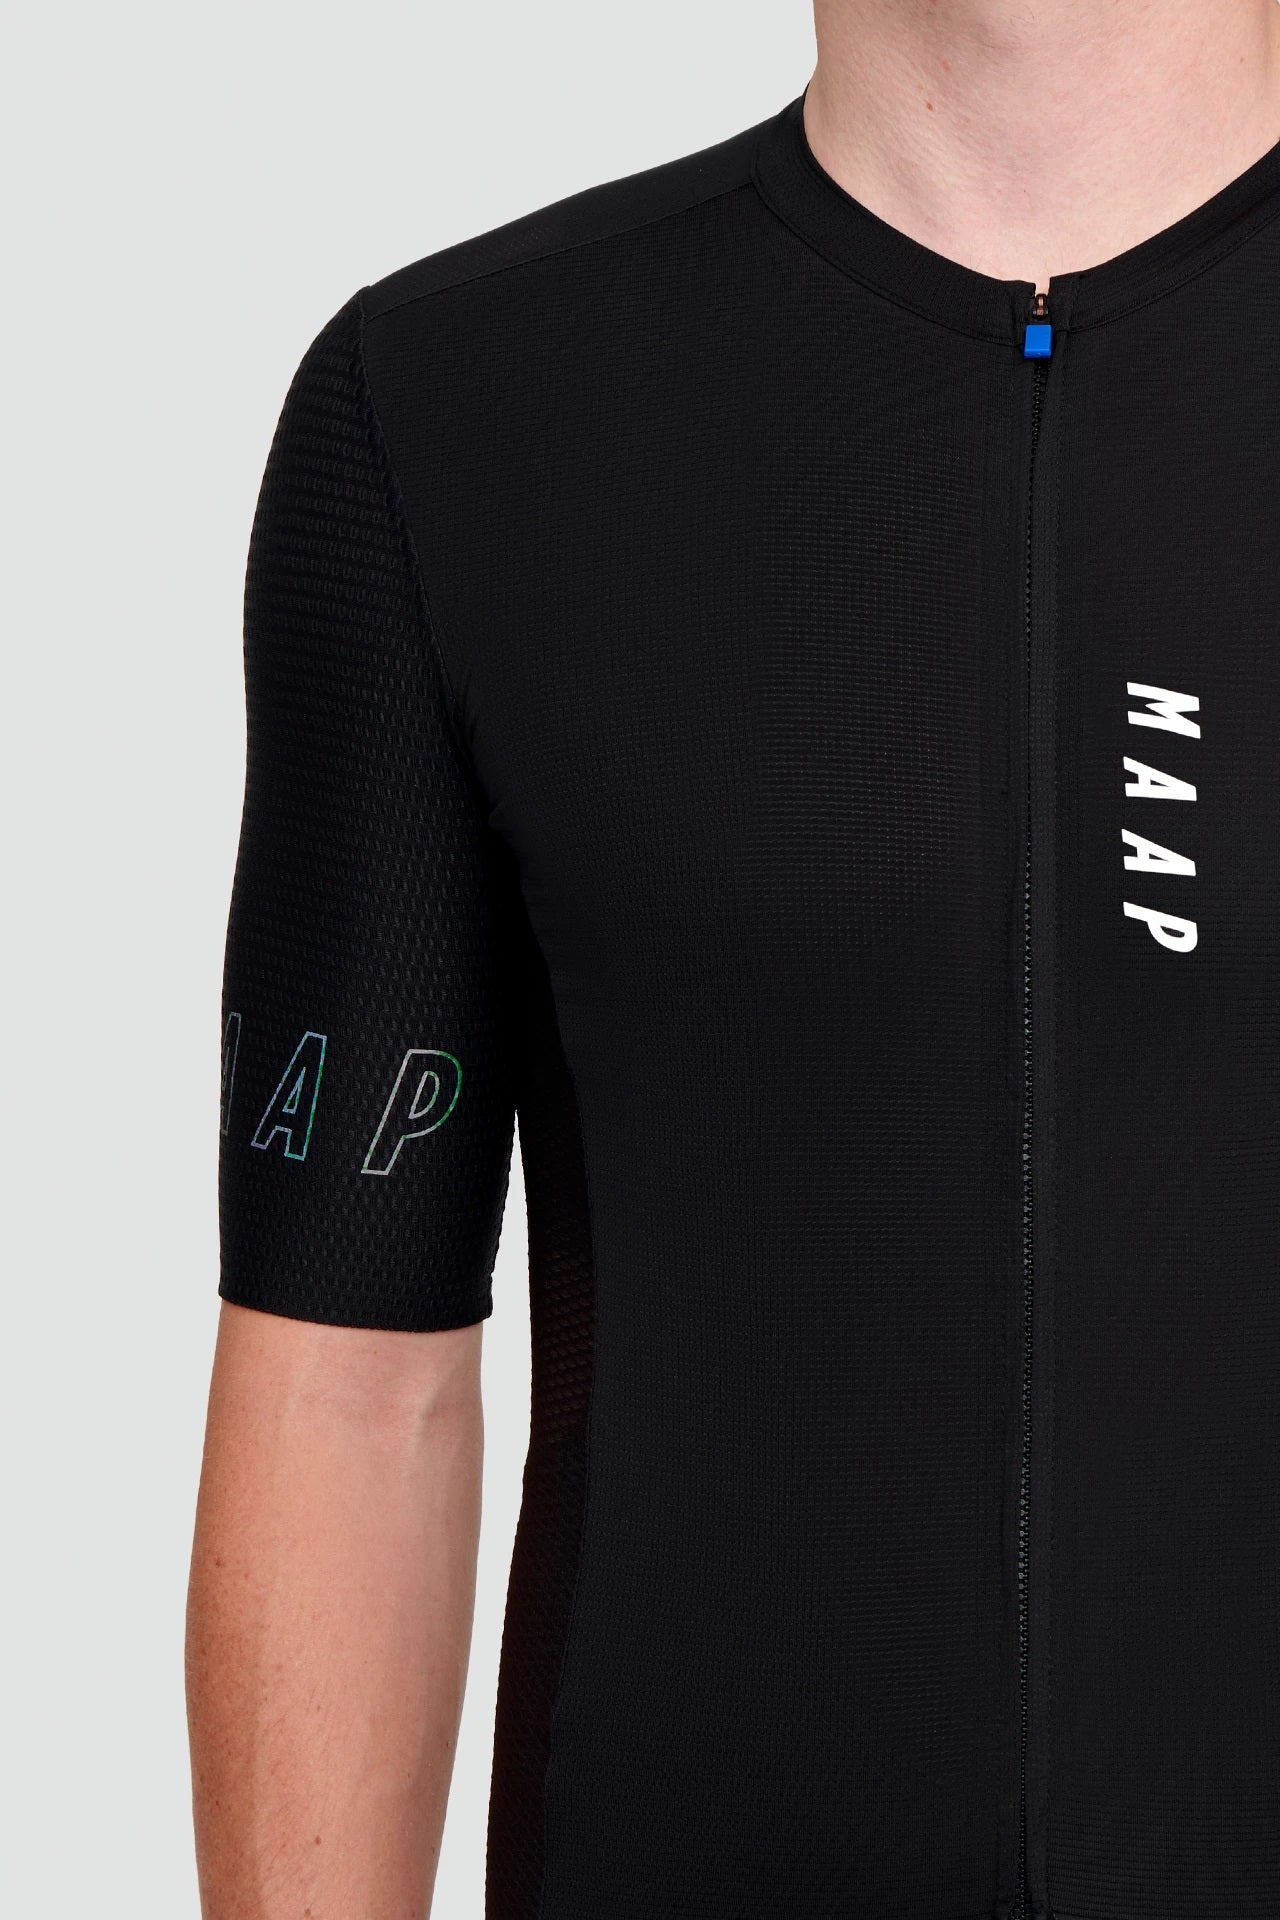 Jersey Manches Courtes MAAP Stealth Race Fit